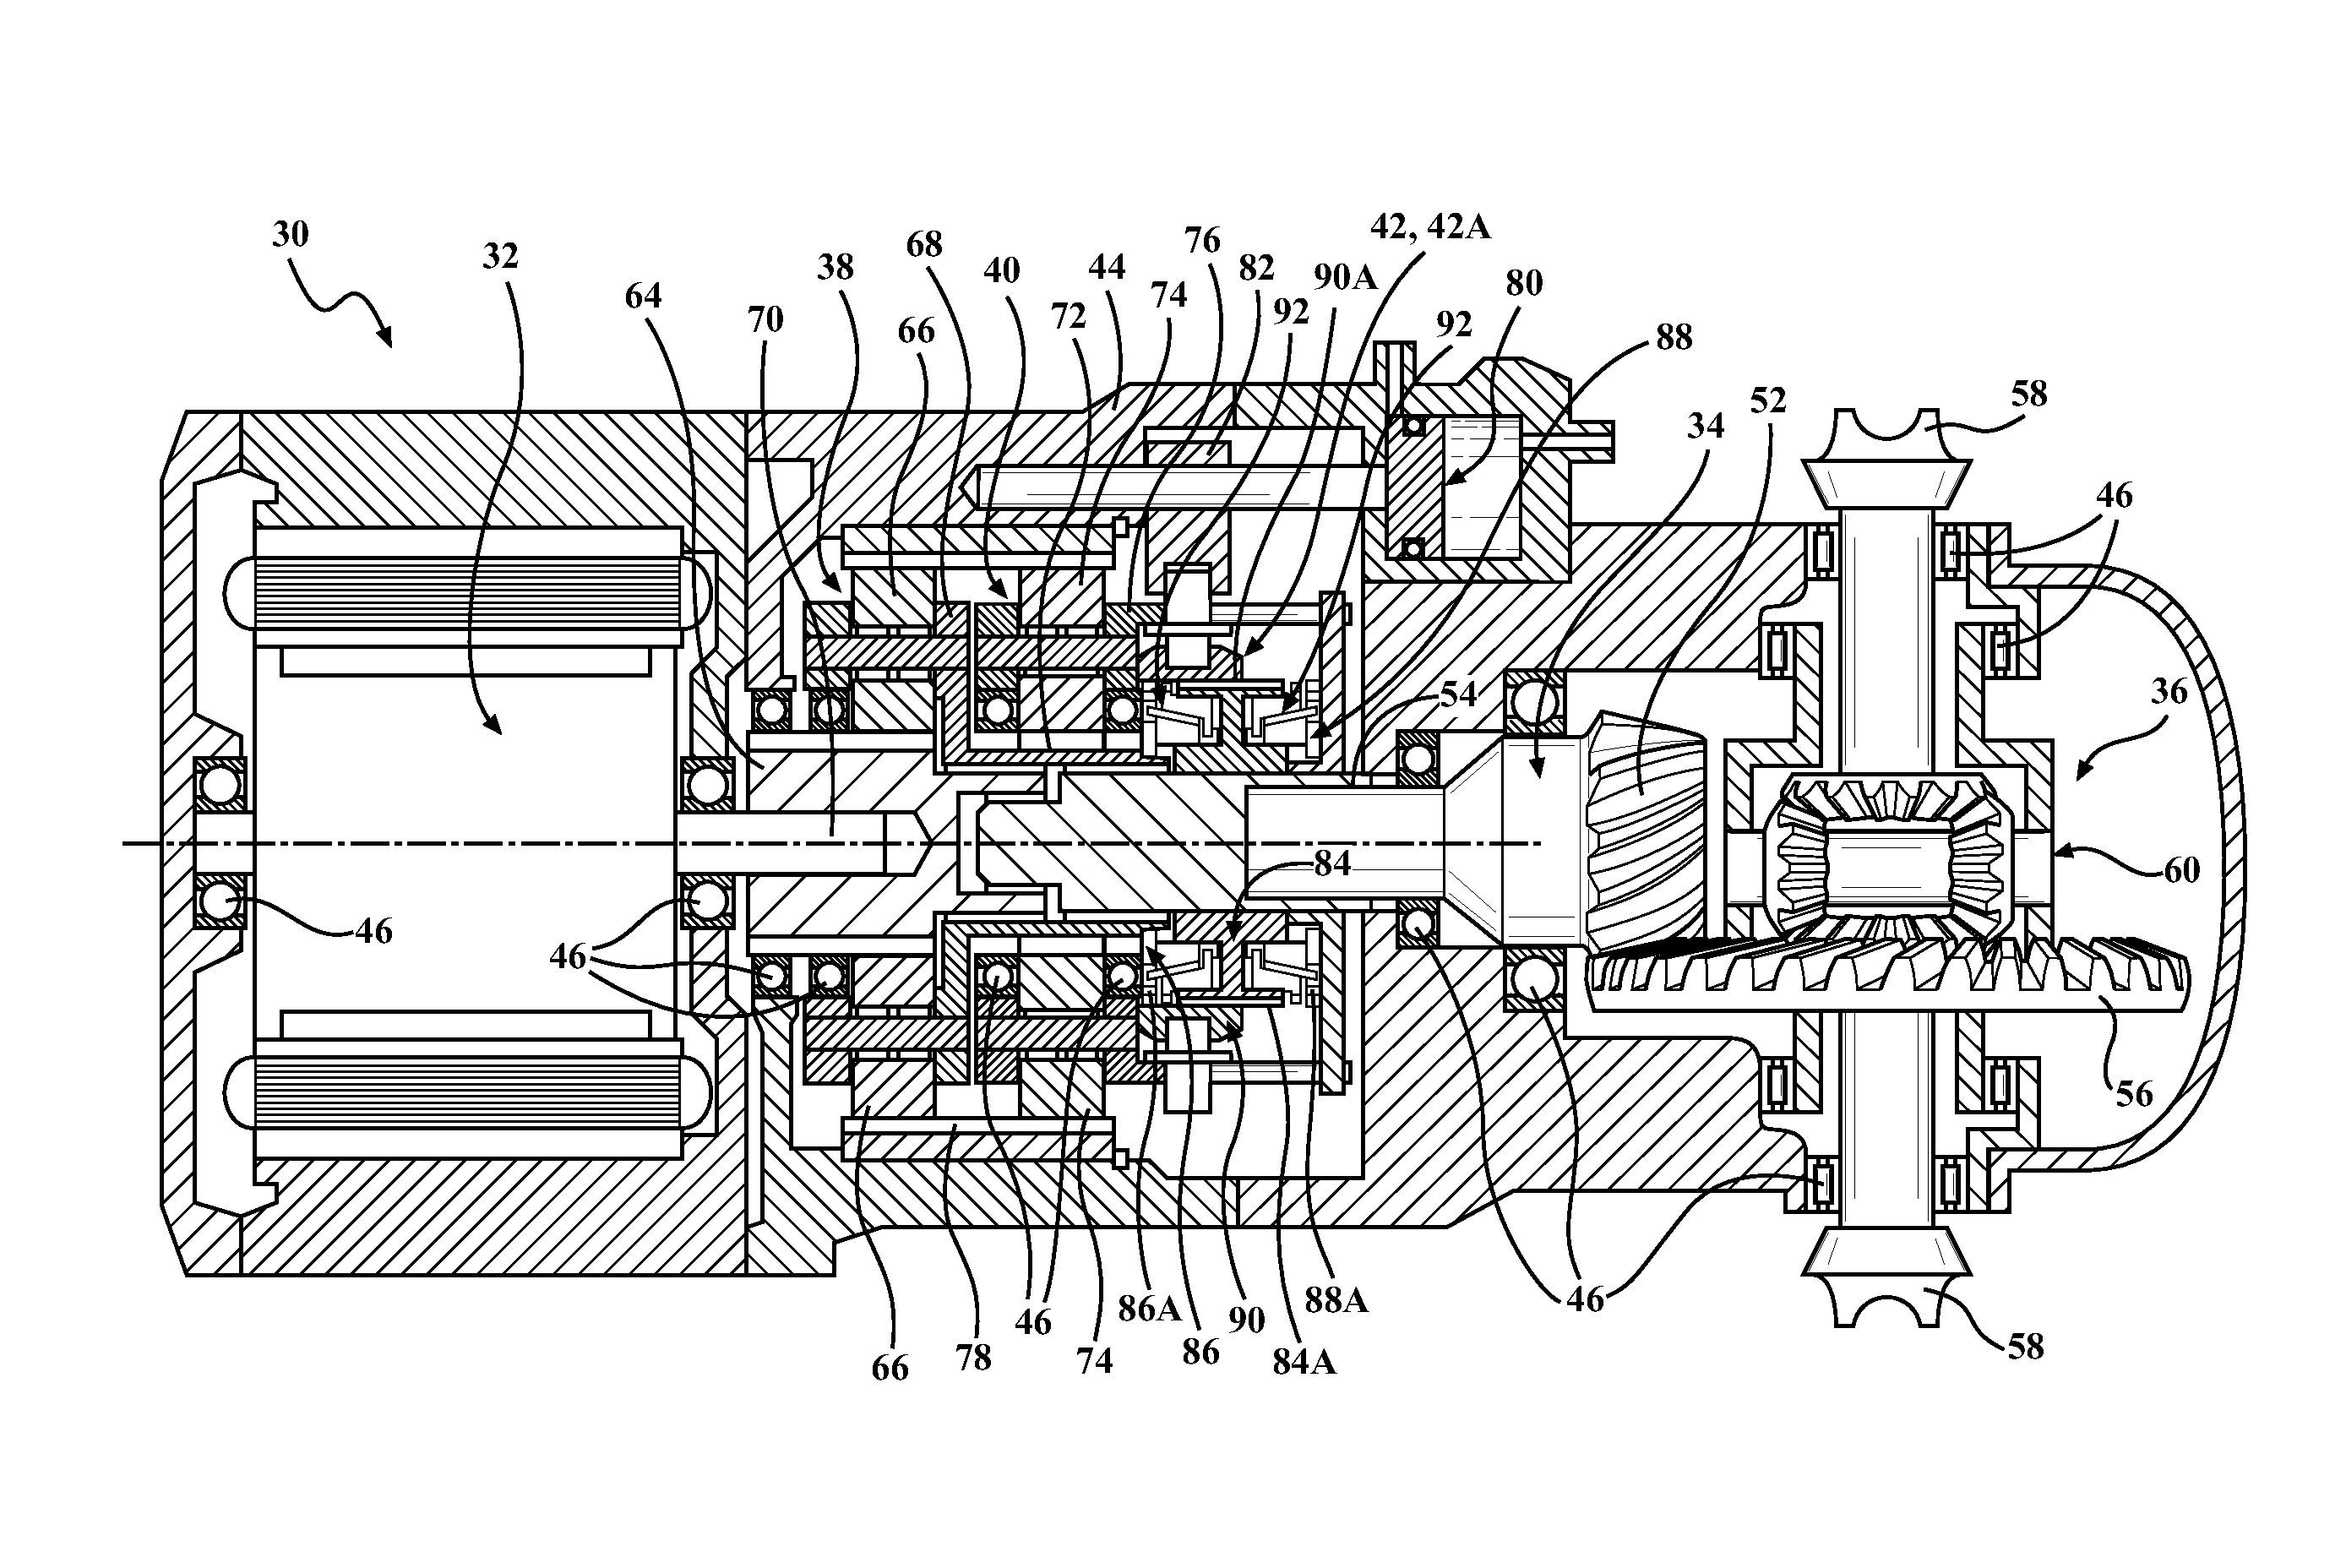 Electric drive unit and powertrain system incorporating the same